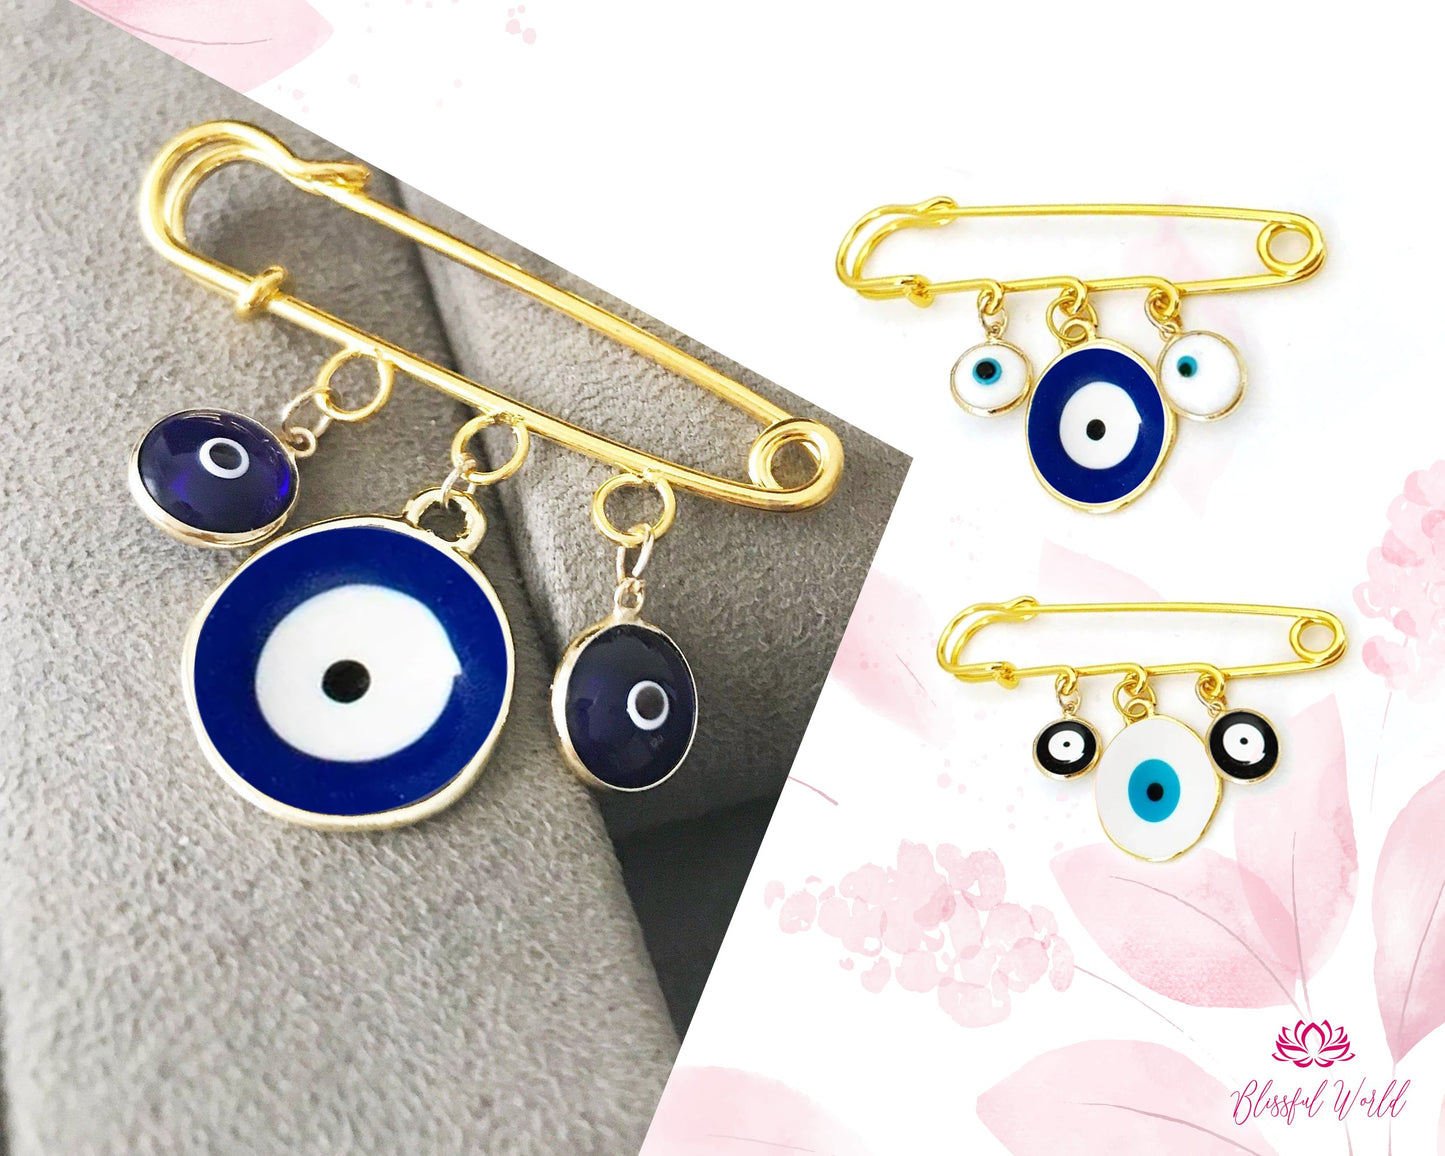 Evil eye safety pin - gold plated evil Eye pins - protection for baby - baby shower gift - birth announcement - tiny evil eye pins